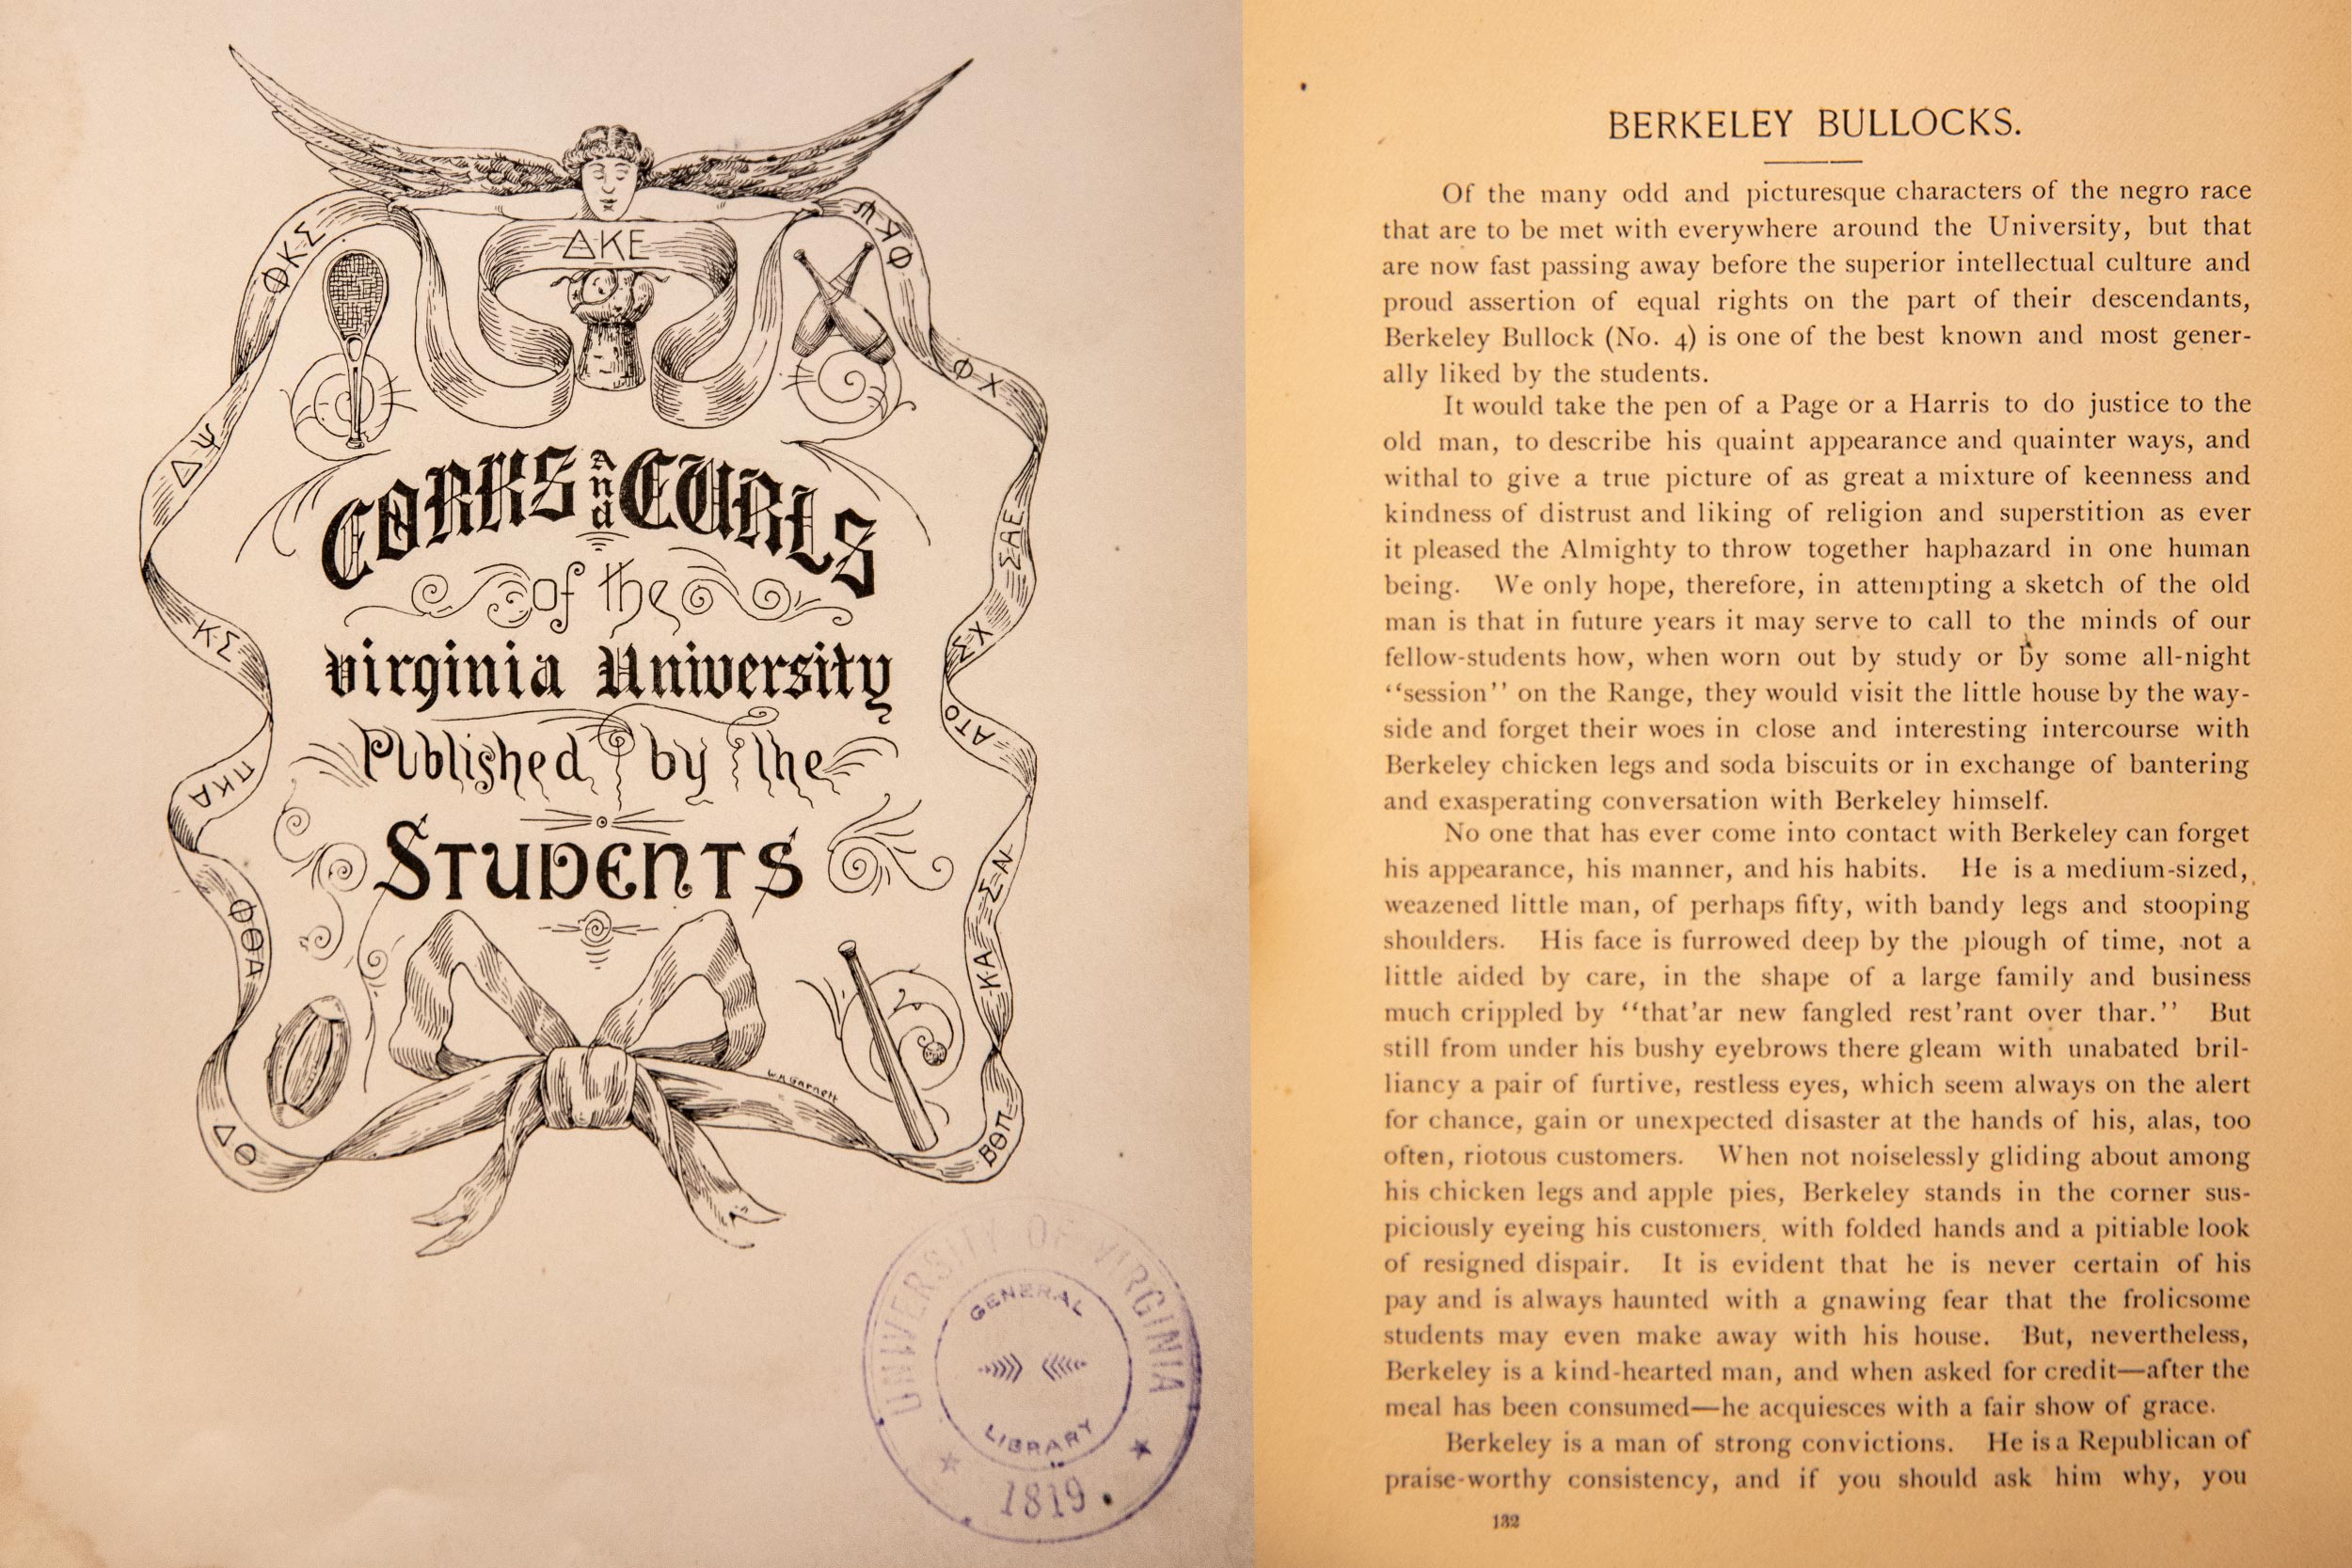 Book that reads Corks and curls of the Virginia university published by the students and a page about Berkeley Bullocks